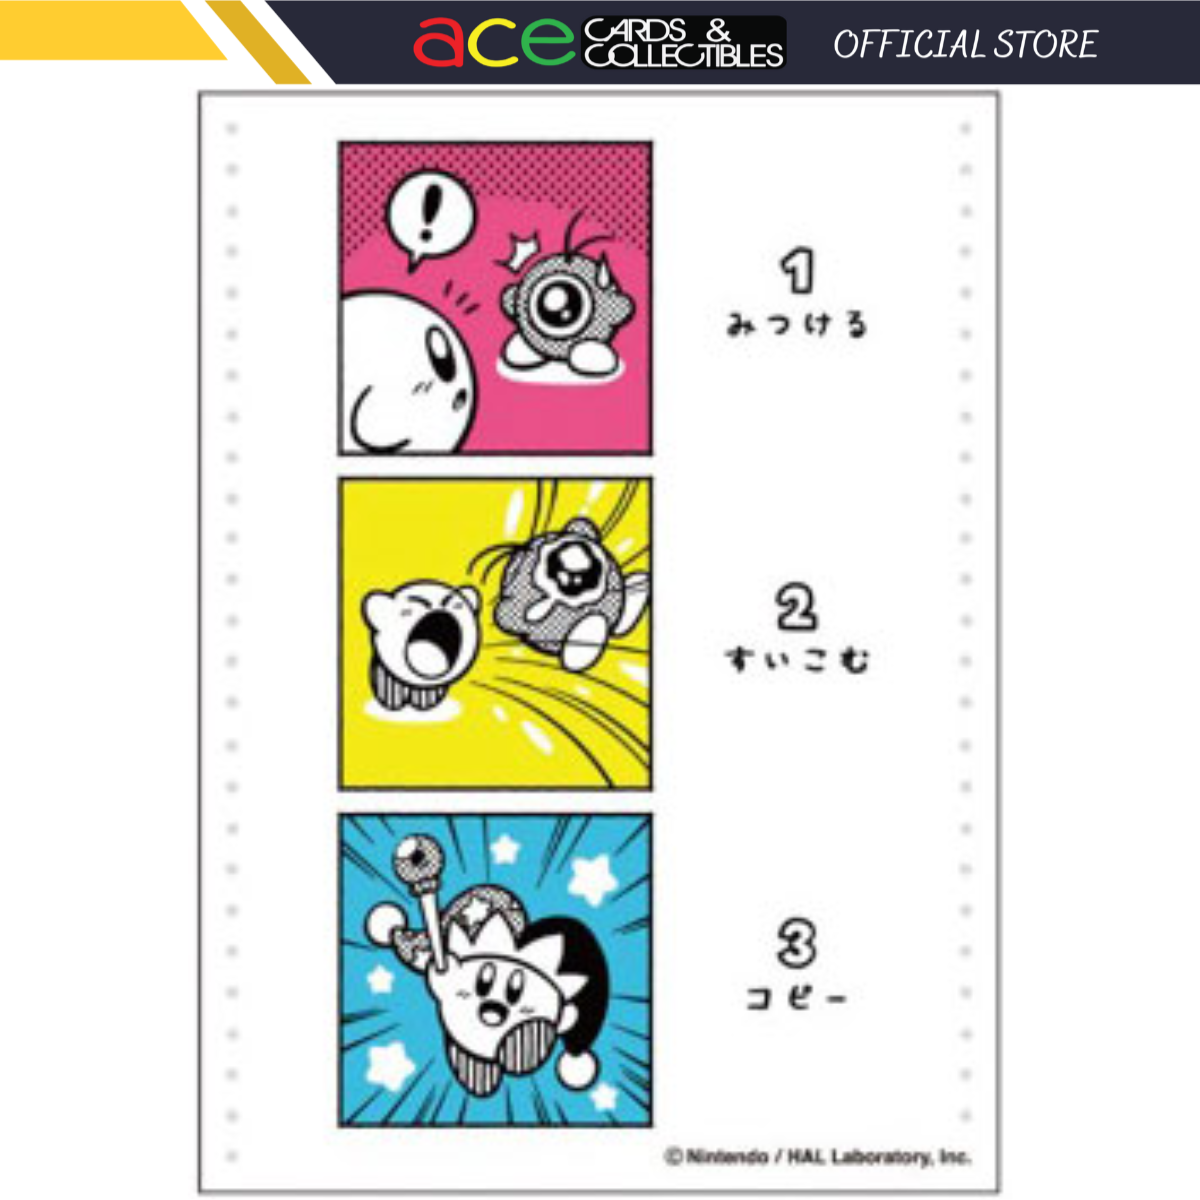 Ensky Character Sleeve - Kirby Horoscope "How To Copy" [EN-1223]-Ensky-Ace Cards & Collectibles